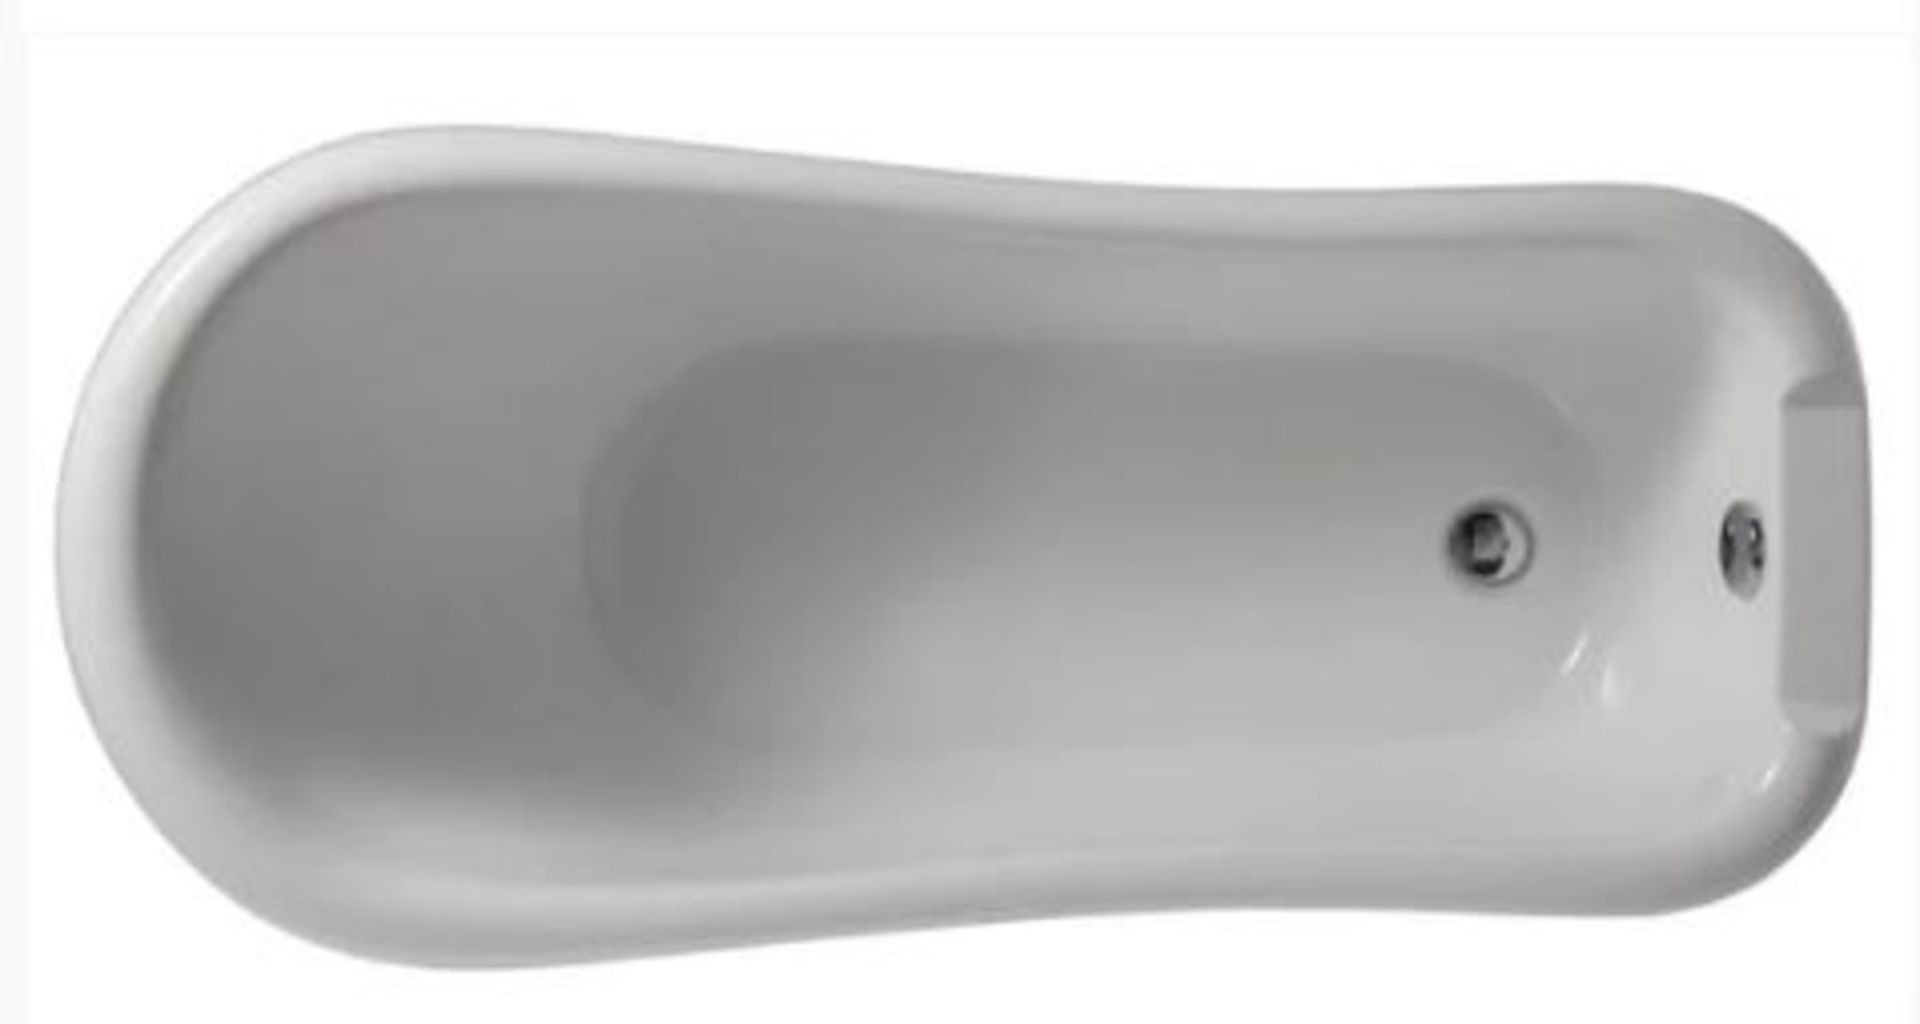 1 X 1550 Winchester Roll Top Bath (win1550) - Image 2 of 5